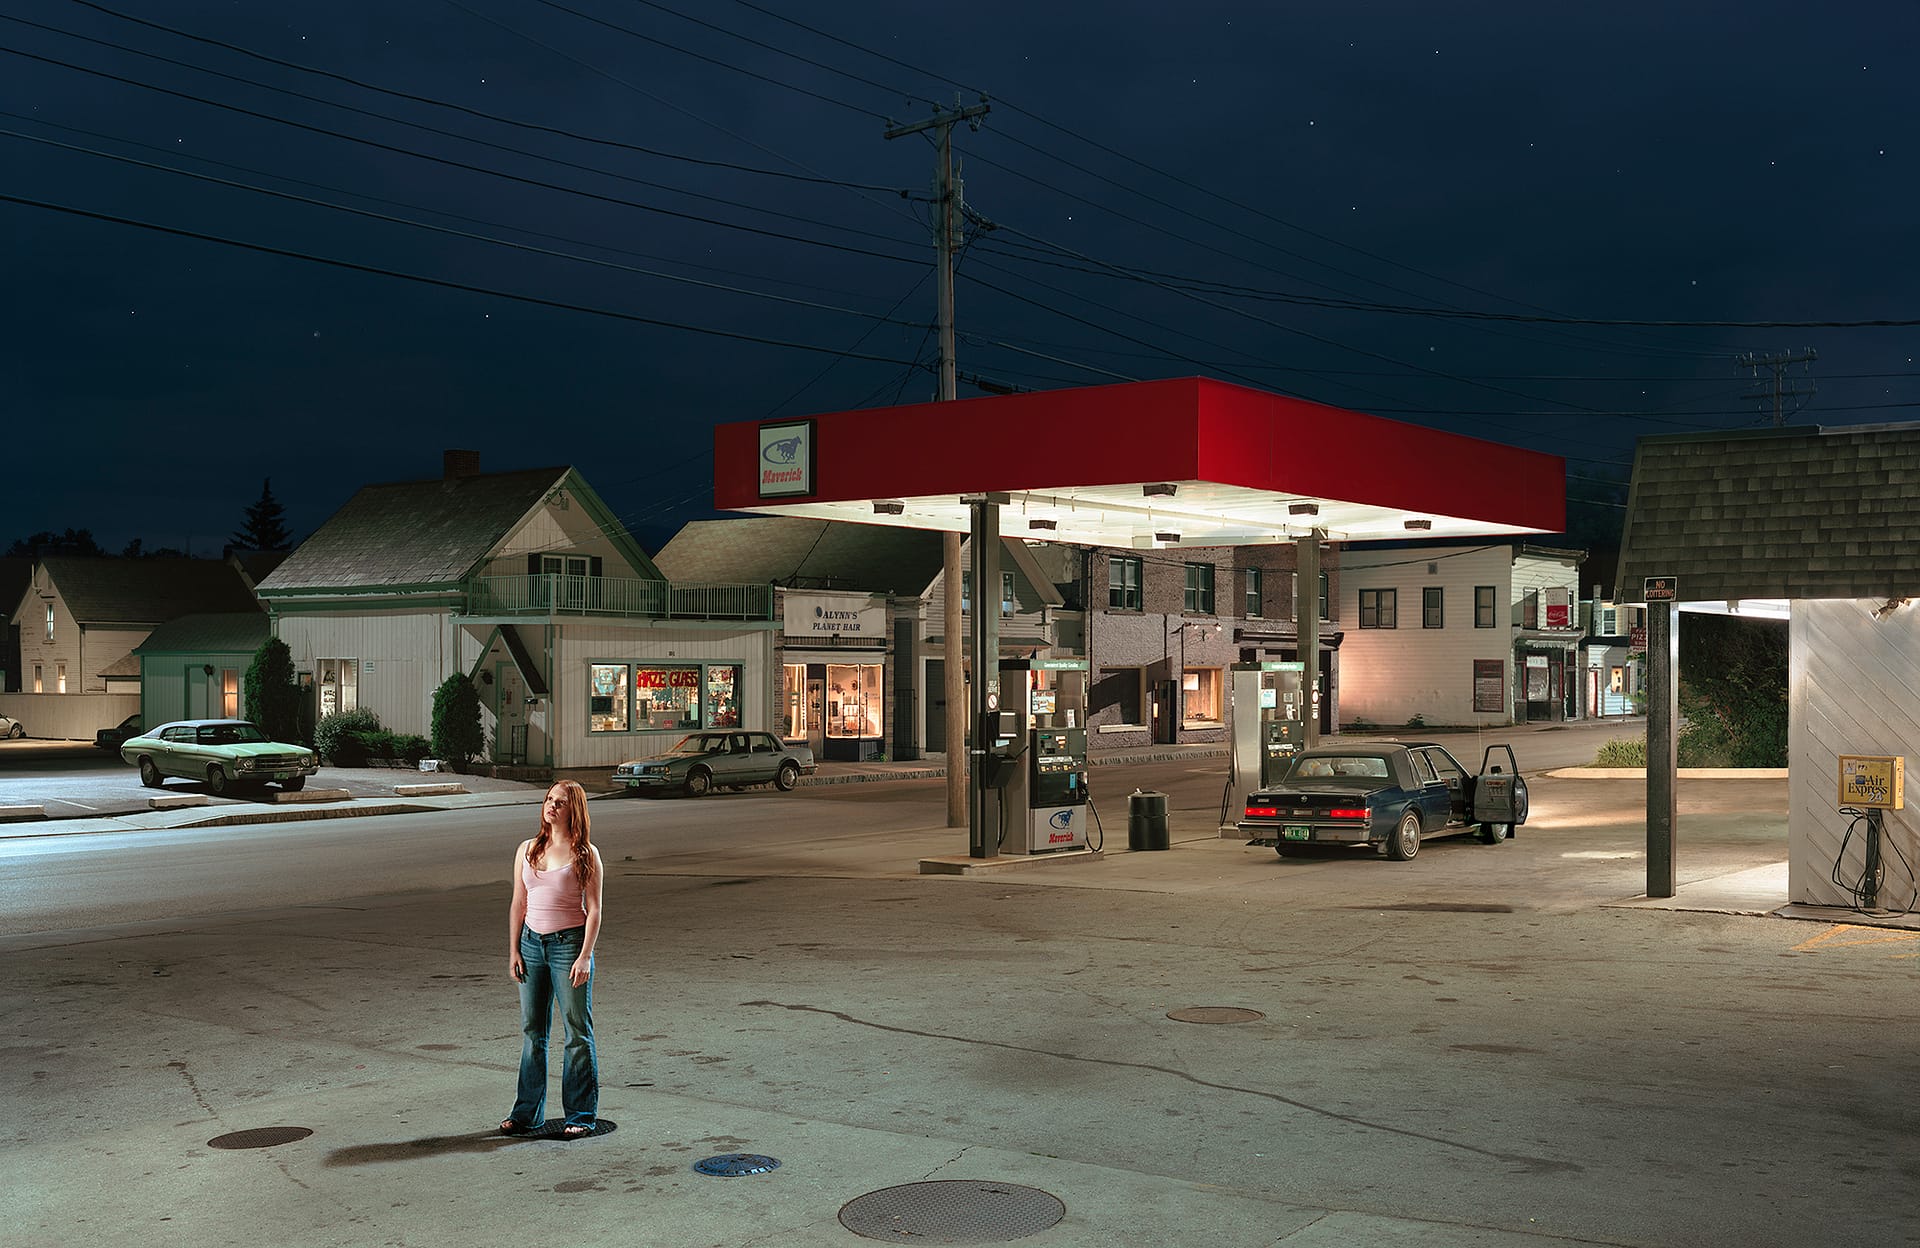 Gregory Crewdson Releases a Limited-Edition Photograph to Benefit the Triplex Movie Theater